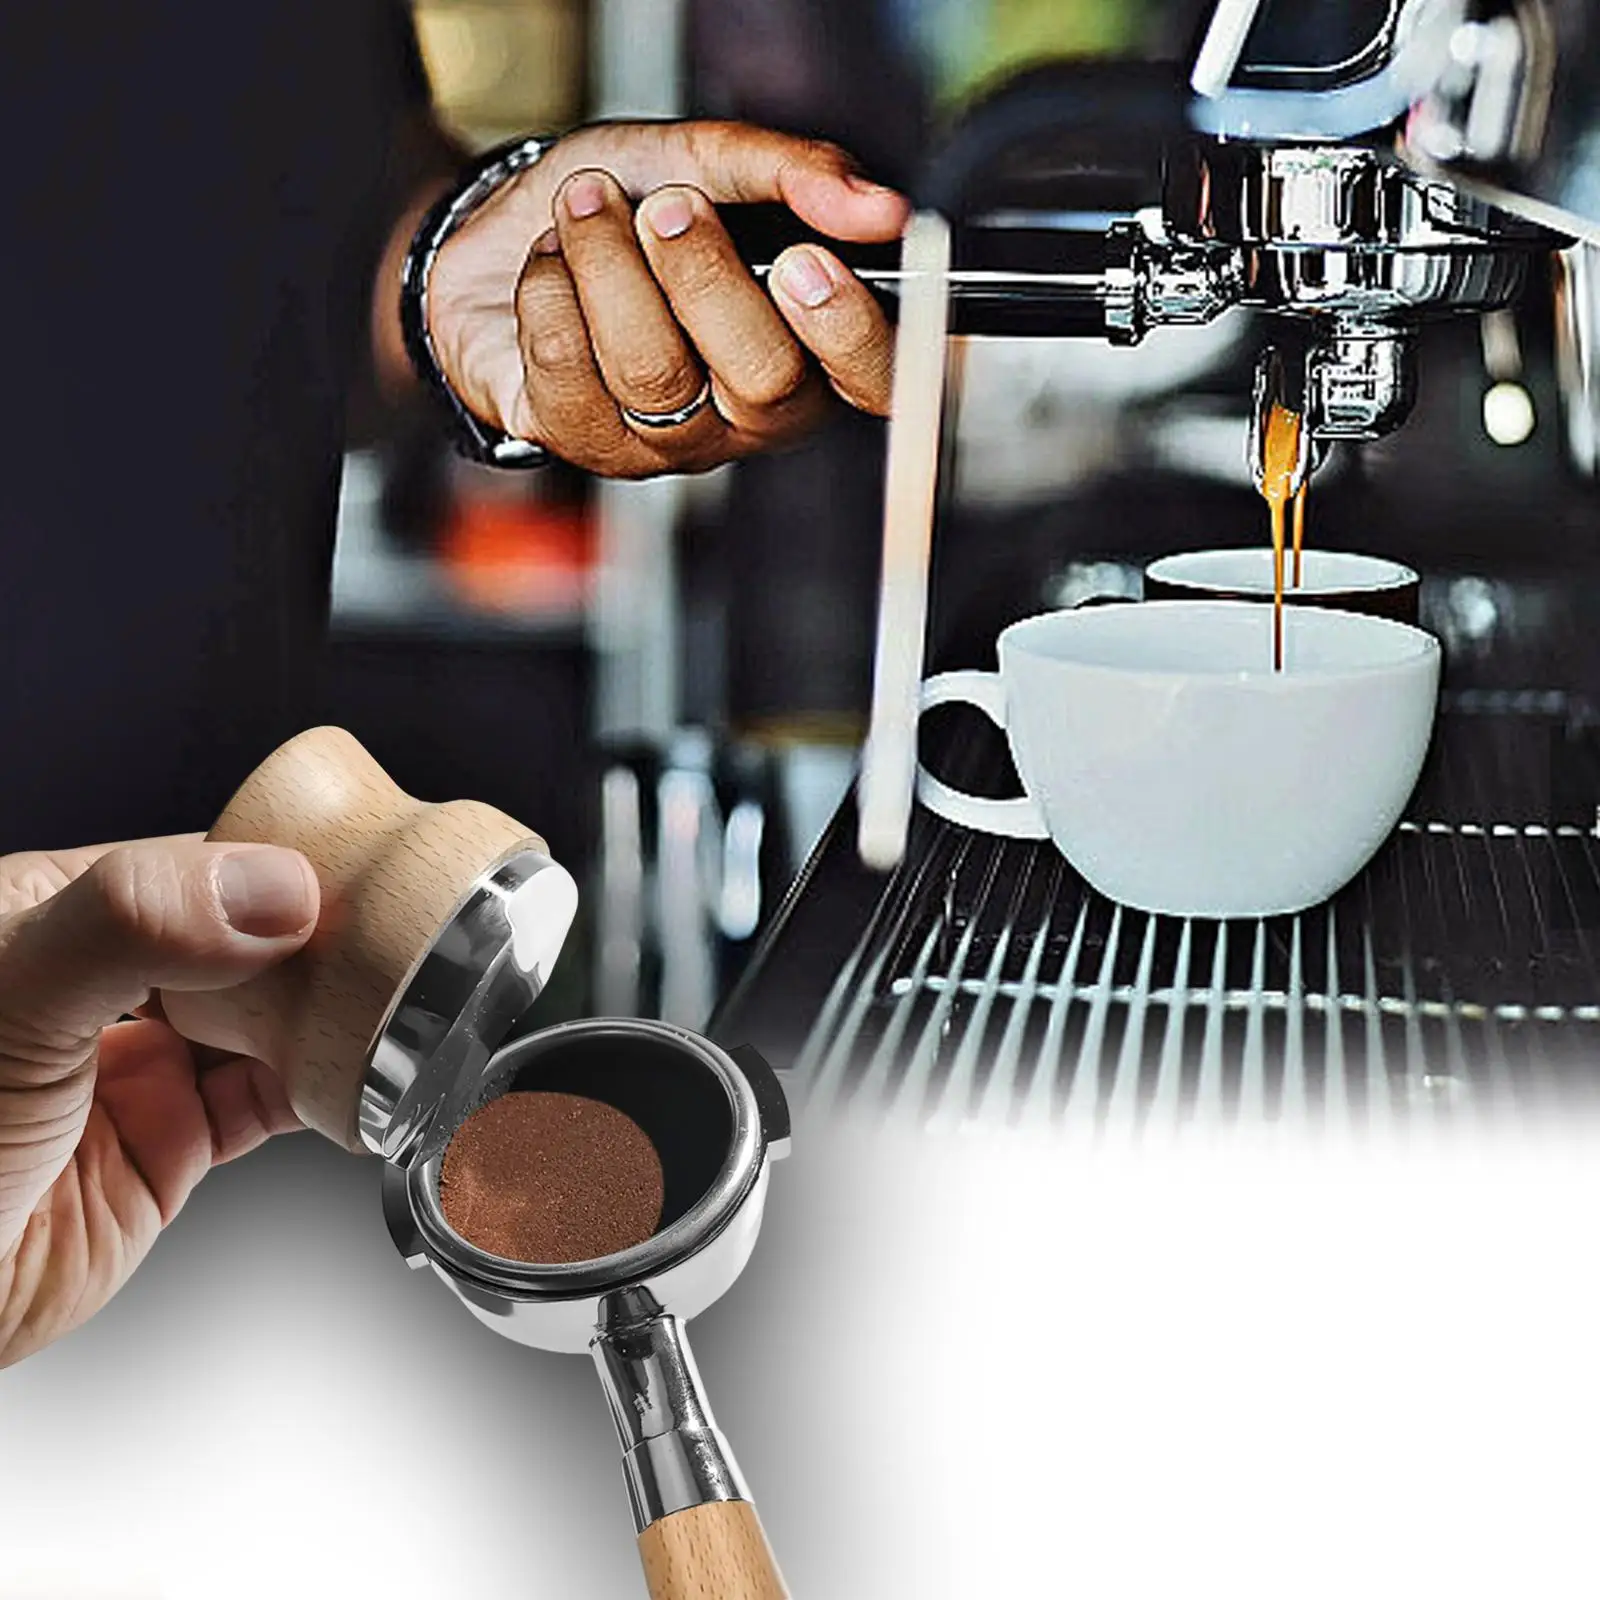 Espresso Distributor Coffeeware 304 Stainless Steel Professional Portable Espresso Hand Tamper for Kitchen Bar Home Use Cafe